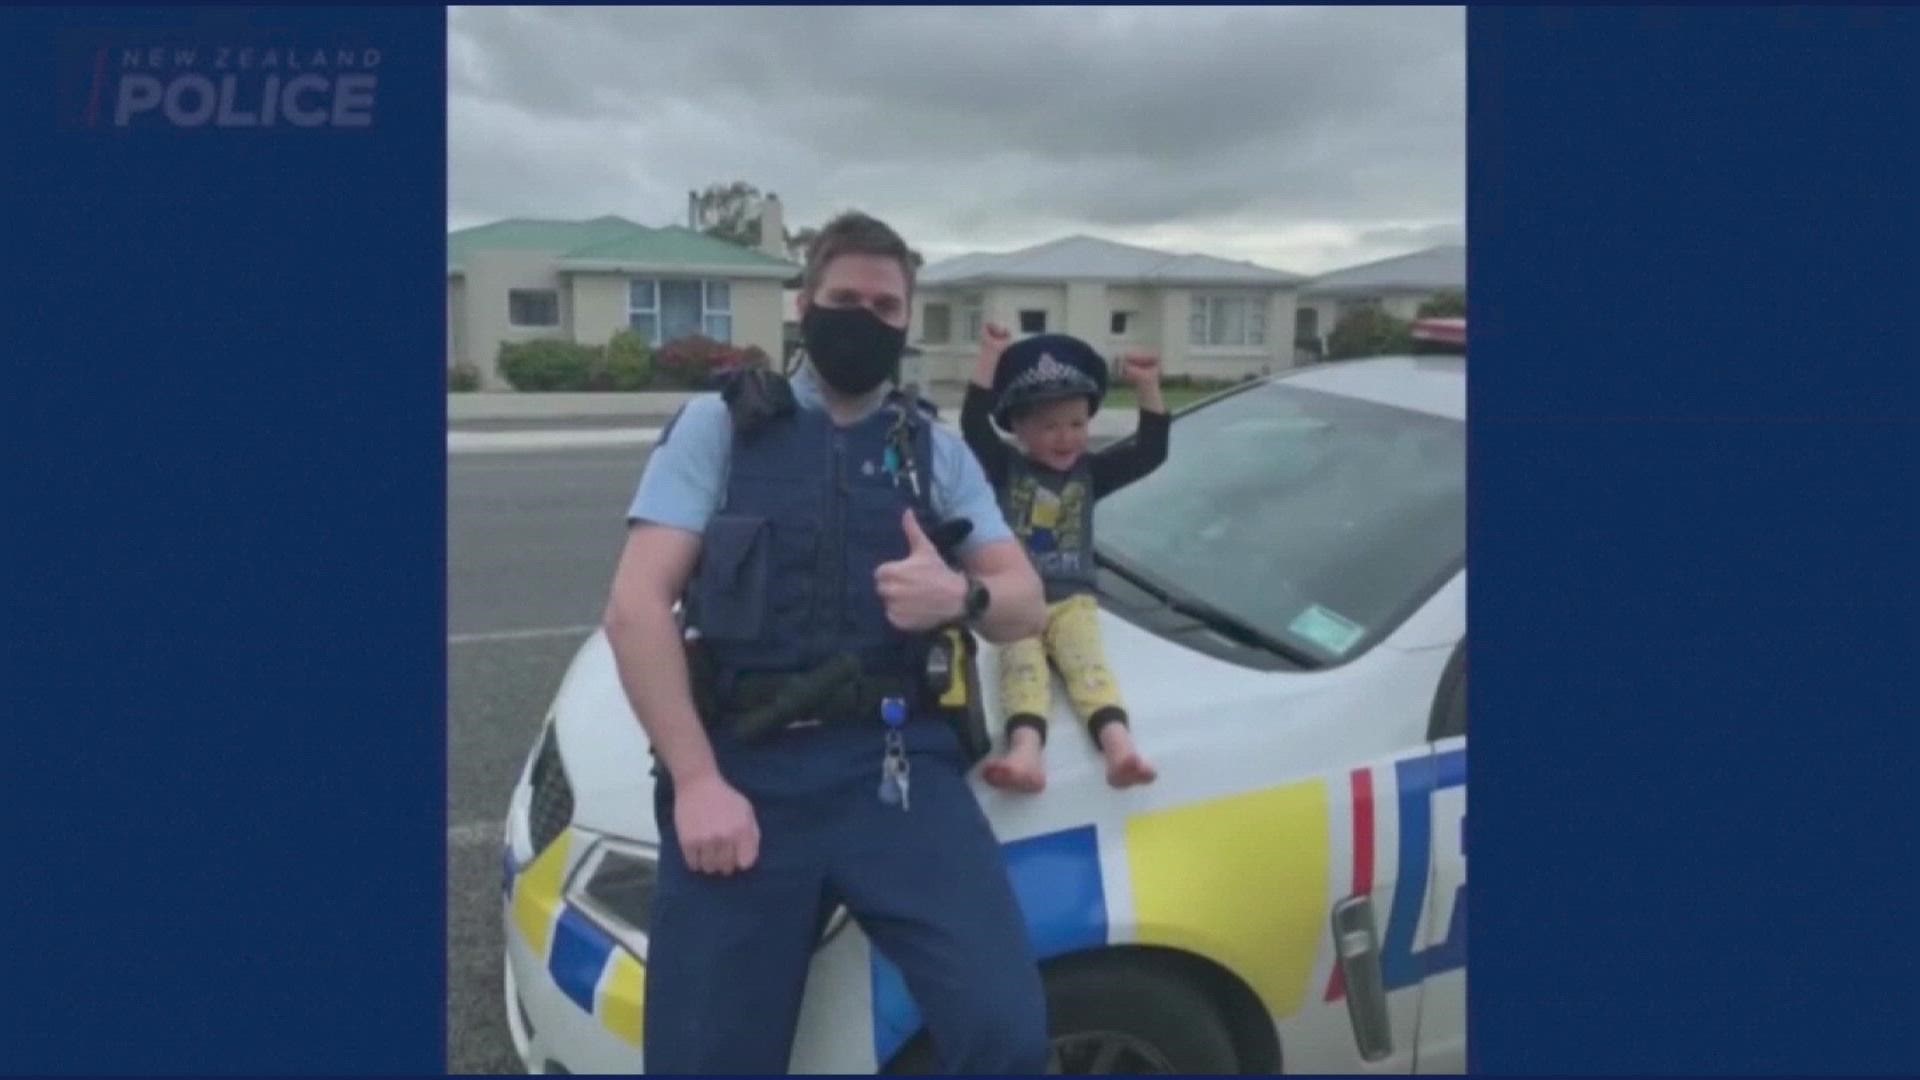 An emergency call made by a 4-year-old New Zealand boy asking for police to come over and check out his toys prompted a real-life callout.